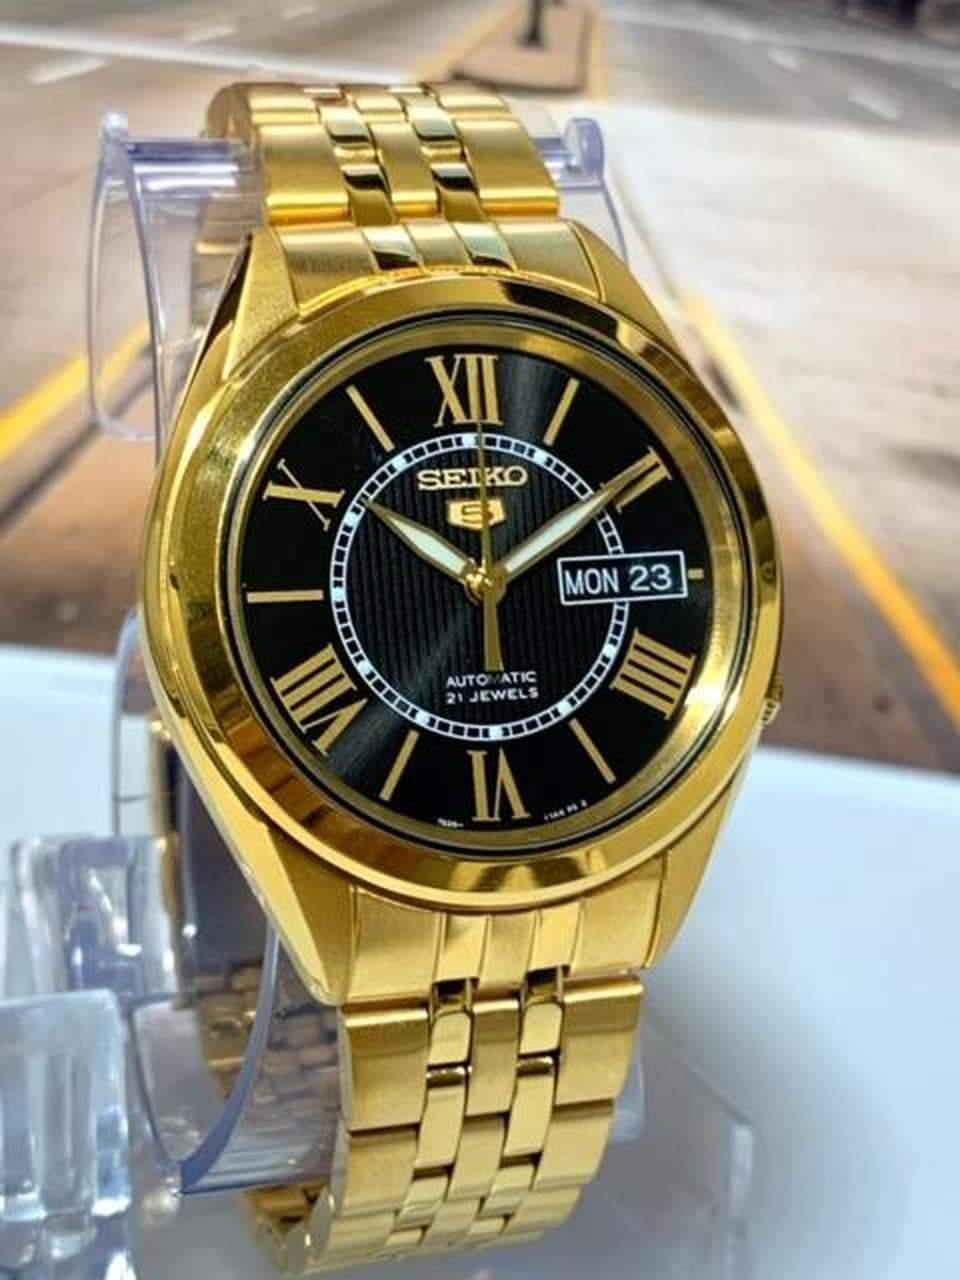 Seiko 5 Classic Men's Size Black Dial Gold Plated Stainless Steel Strap Watch SNKL40K1 - Prestige